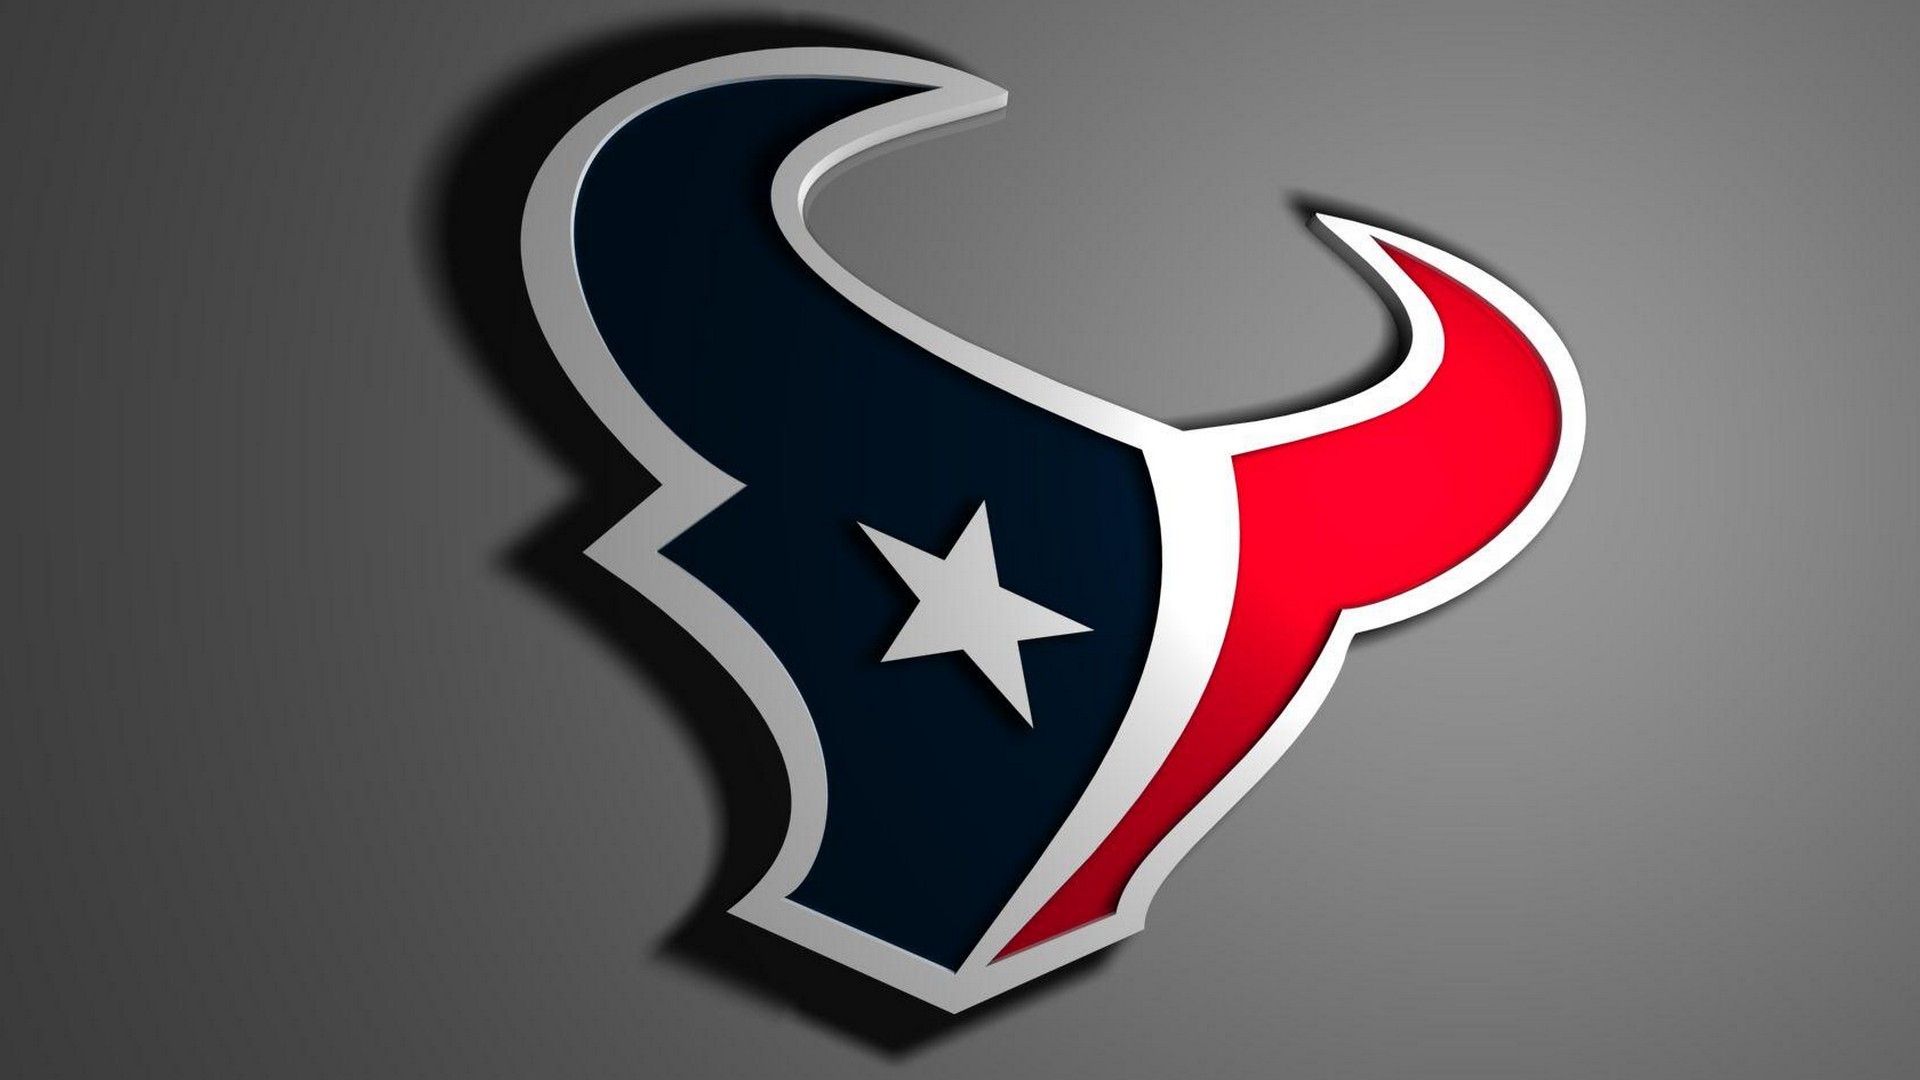 HD Houston Texans NFL Wallpapers with resolution 1920x1080 pixel. You can make this wallpaper for your Mac or Windows Desktop Background, iPhone, Android or Tablet and another Smartphone device